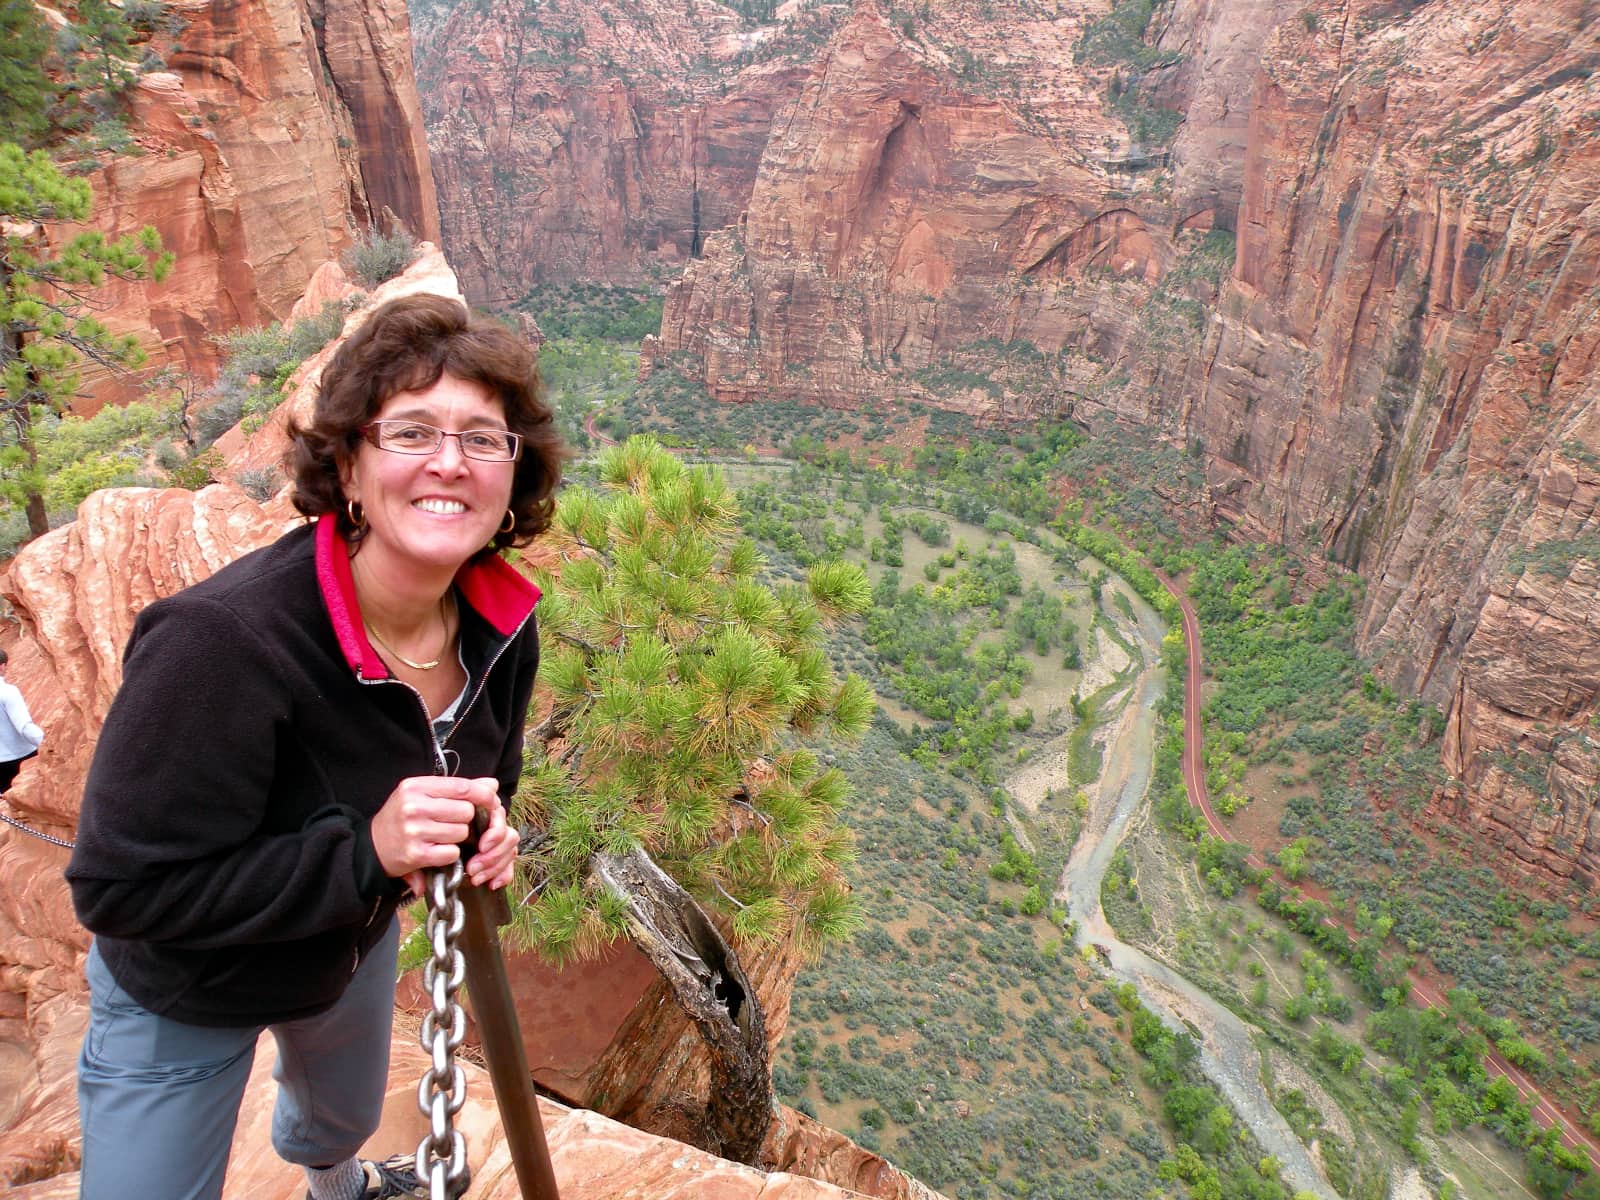 Woman smiling in foreground with winding river in background